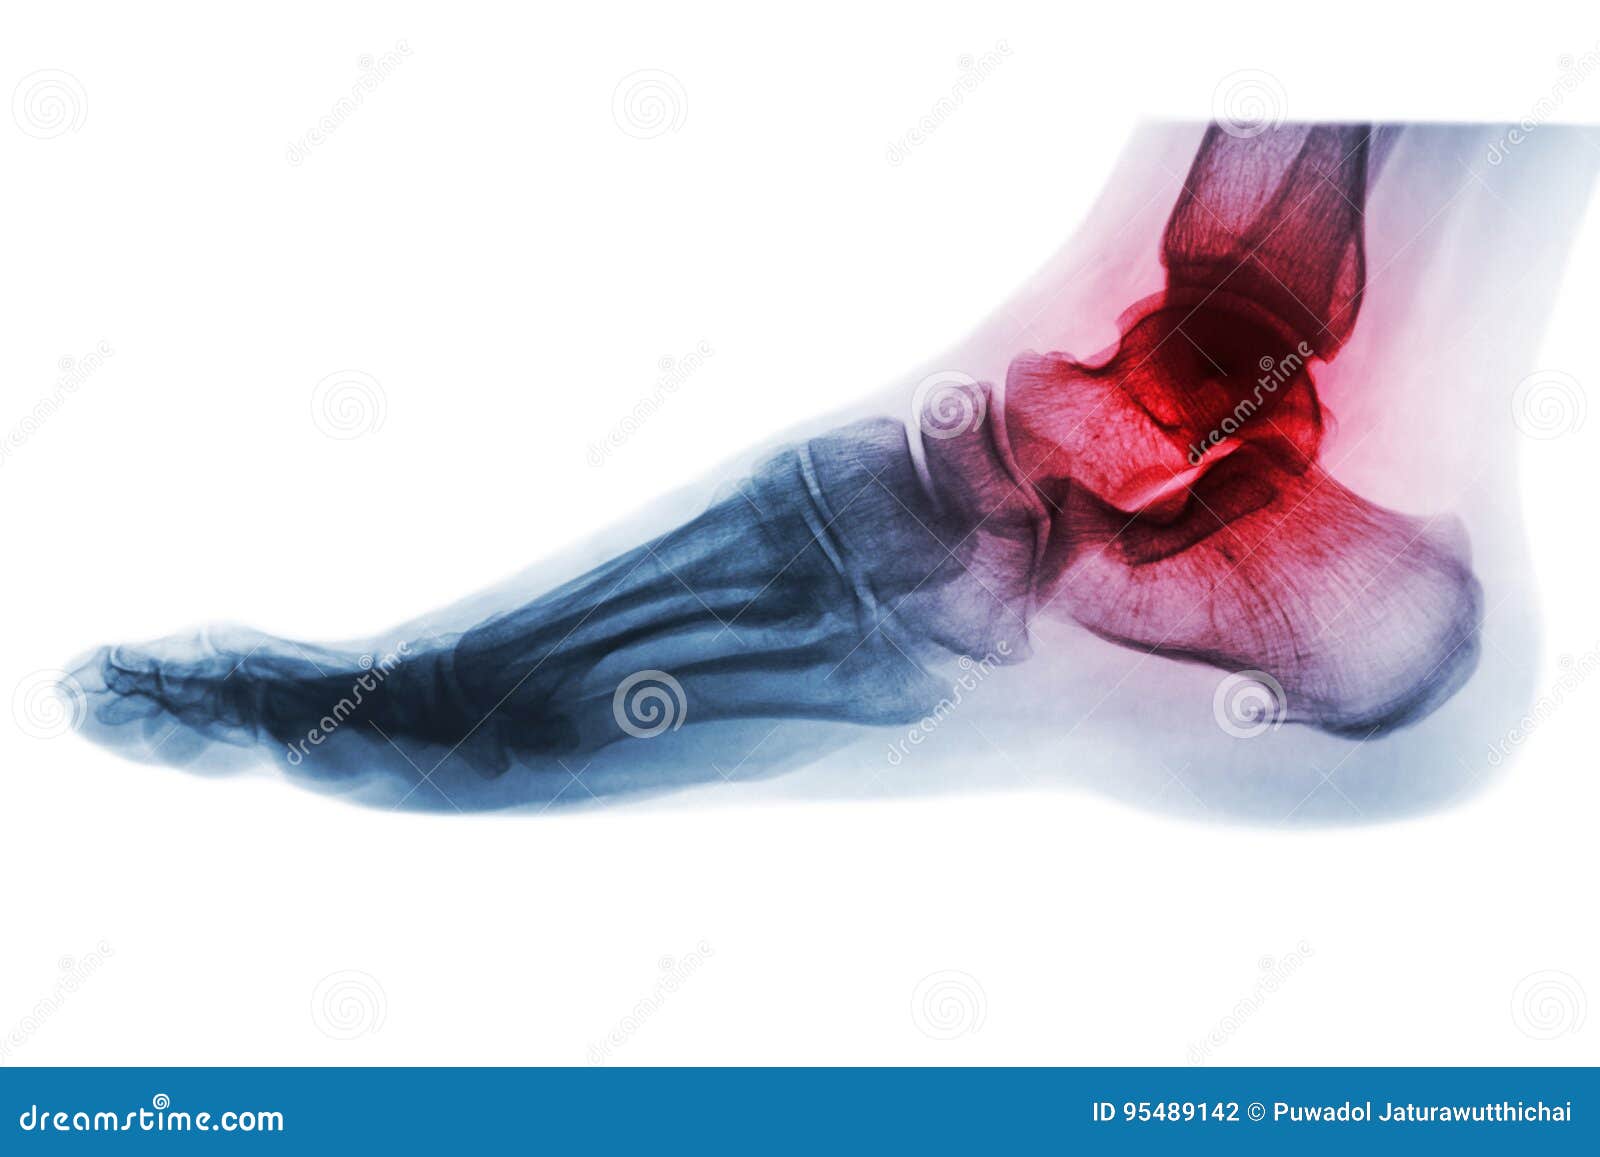 arthritis of ankle . x-ray of foot . lateral view . invert color style .